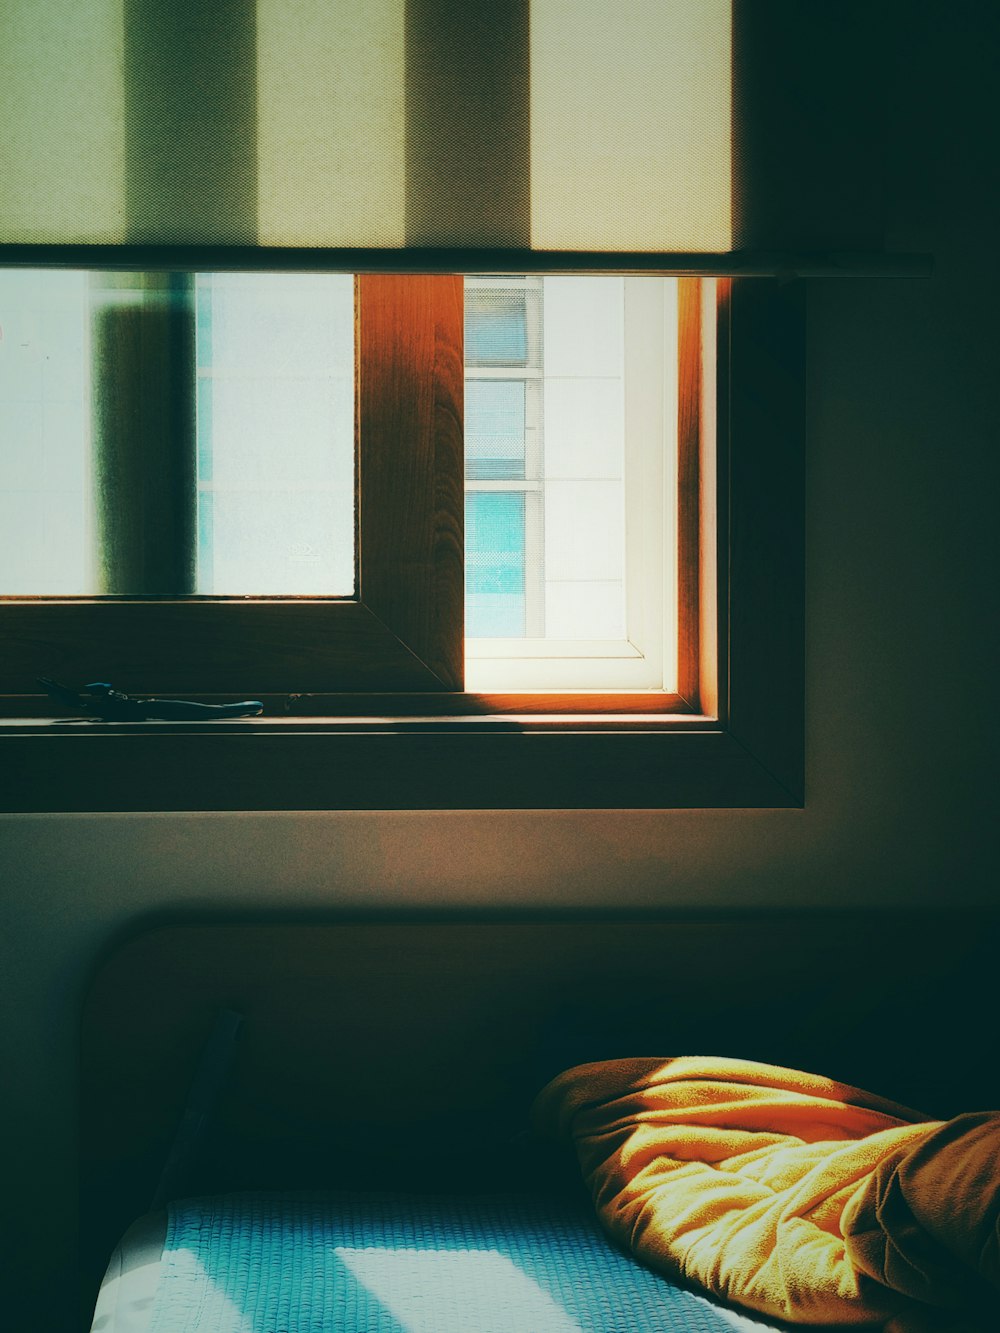 a bed sitting under a window next to a window